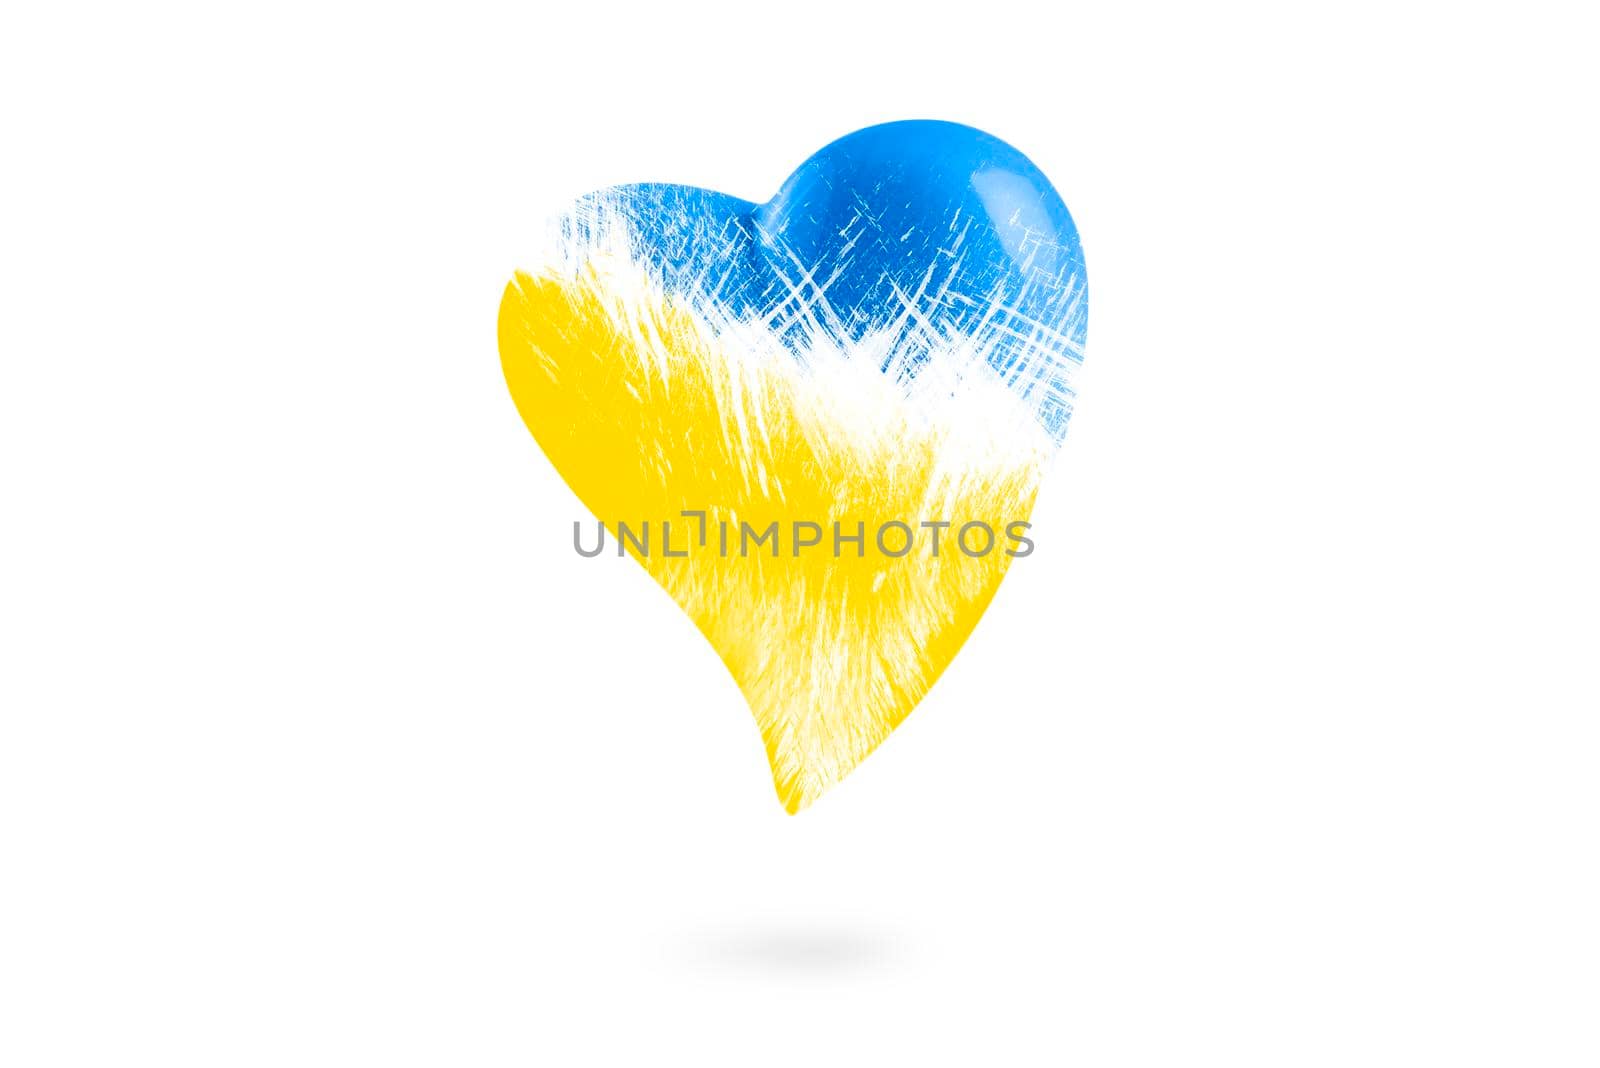 No war in Ukraine. Broken blue-yellow heart on a white isolated background. Save Ukraine. The heart is painted in the colors of the Ukrainian flag - blue and yellow